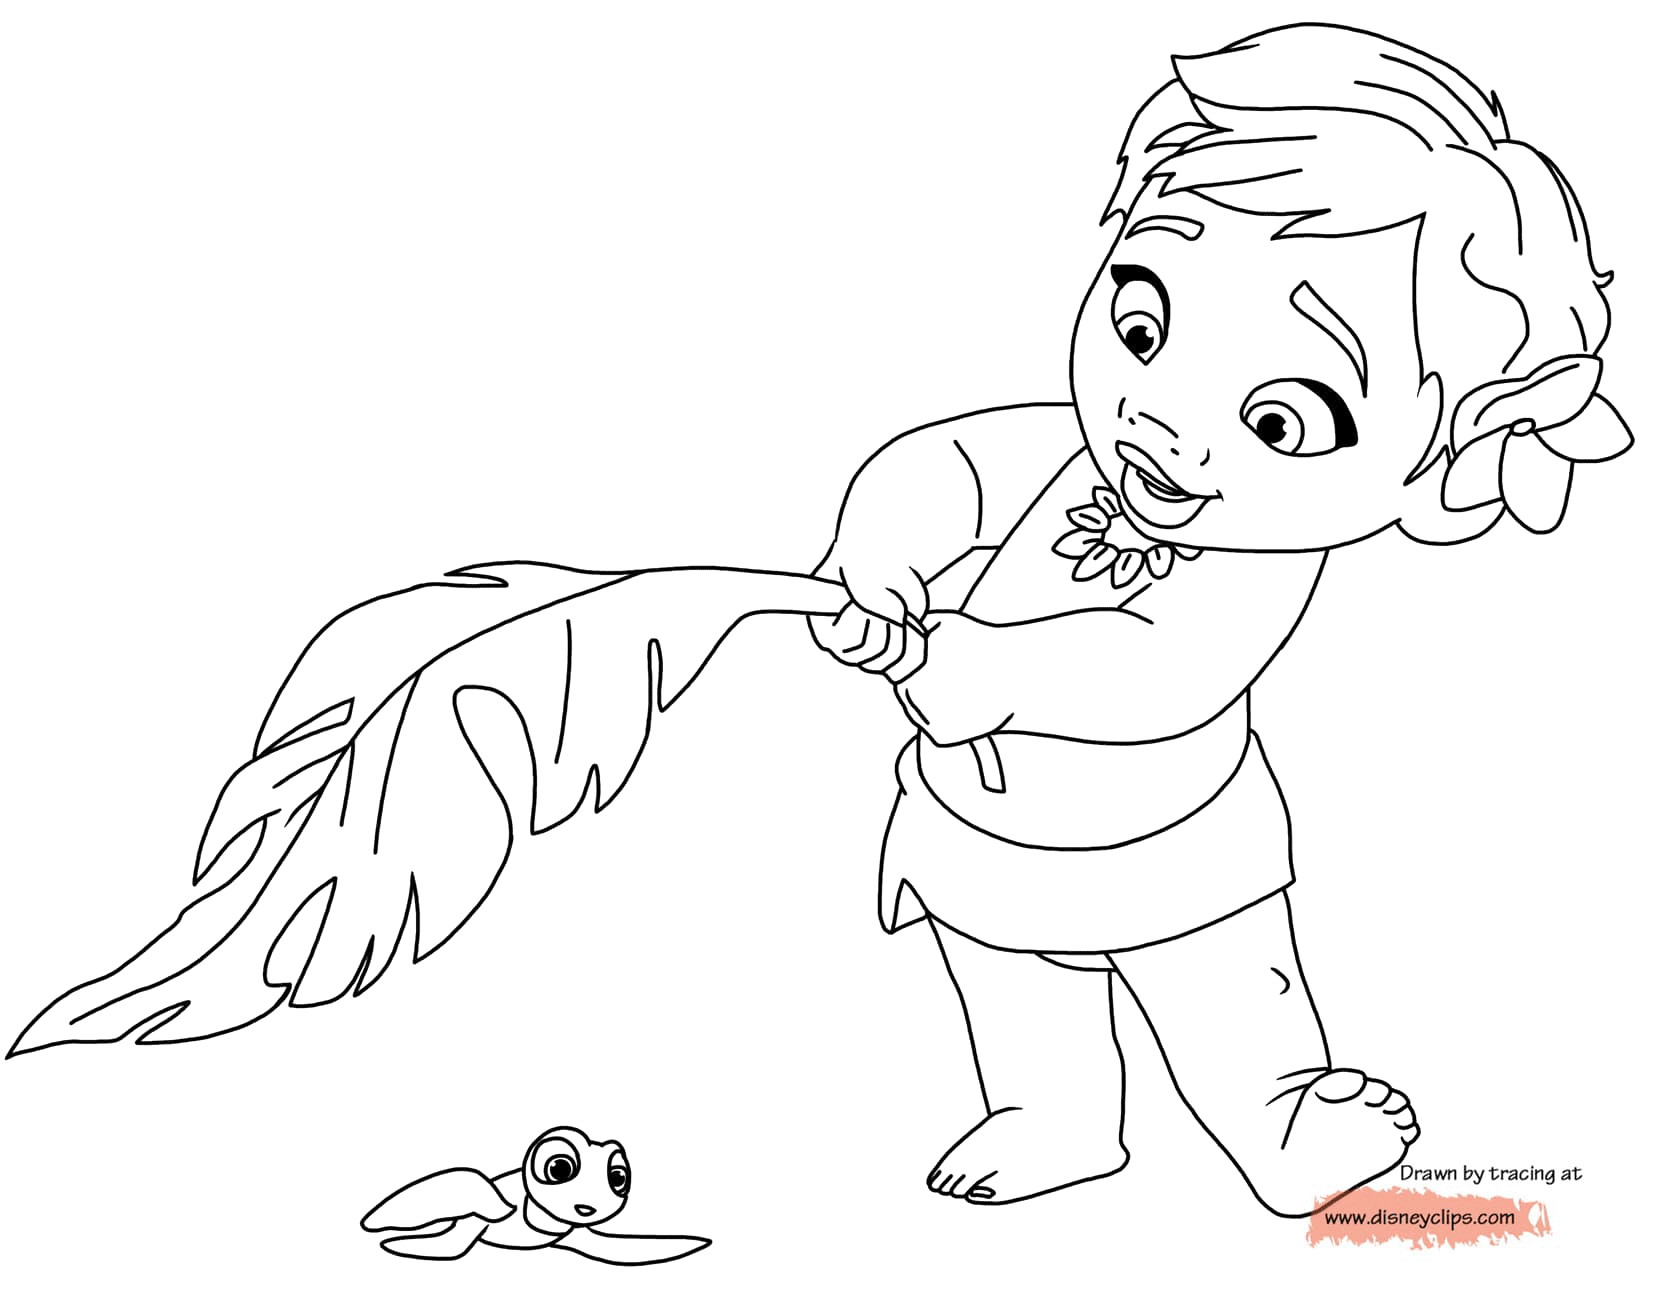 Download Disney S Moana Coloring Pages Disneyclips Com